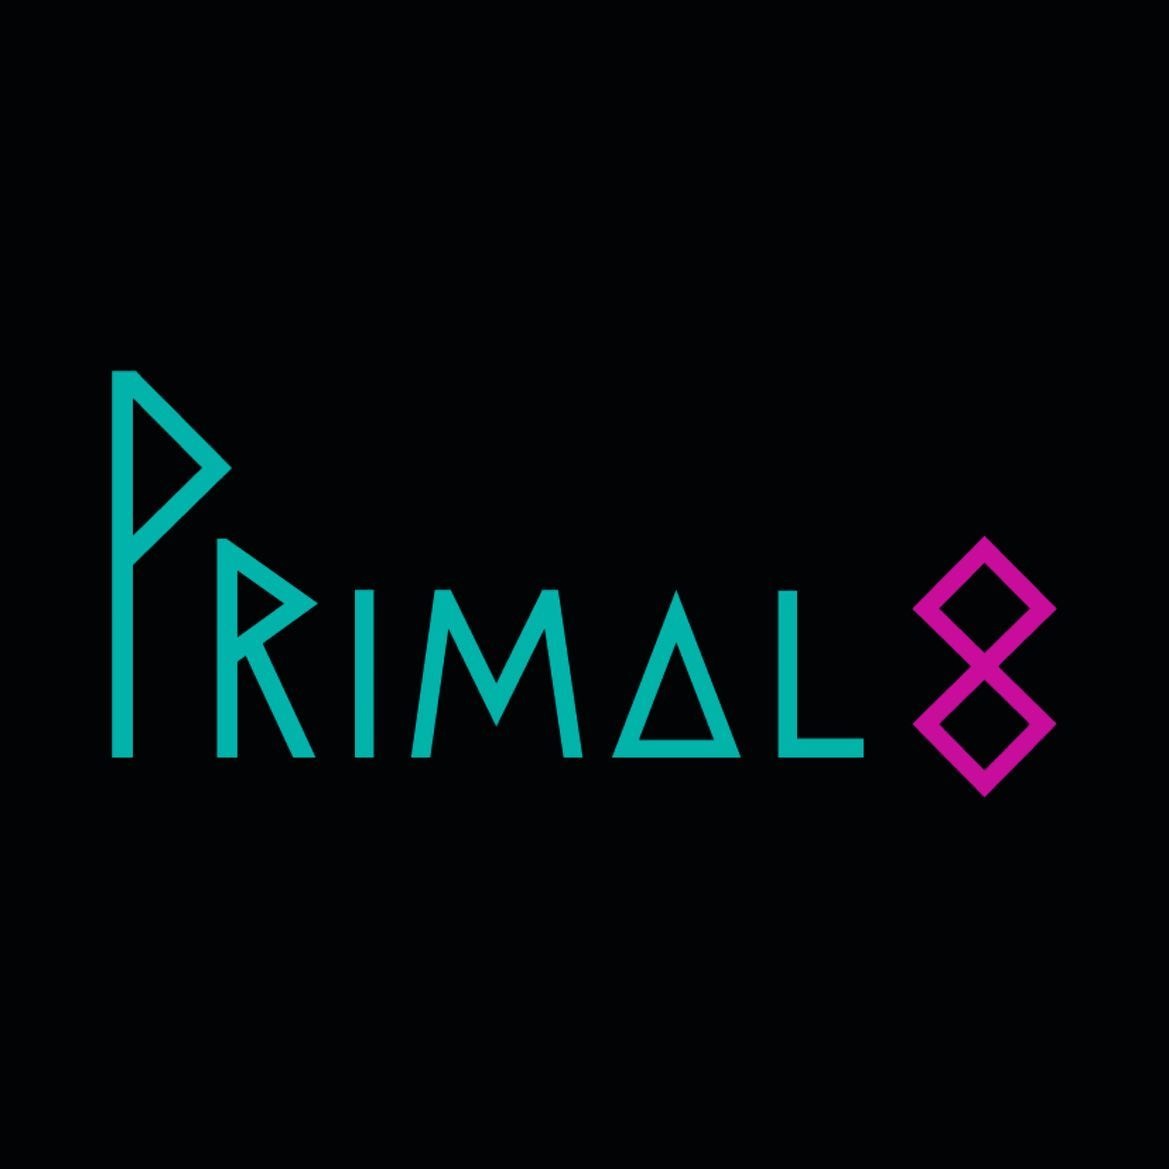 Primal 8 - Health and Wellbeing Cafe and Retail